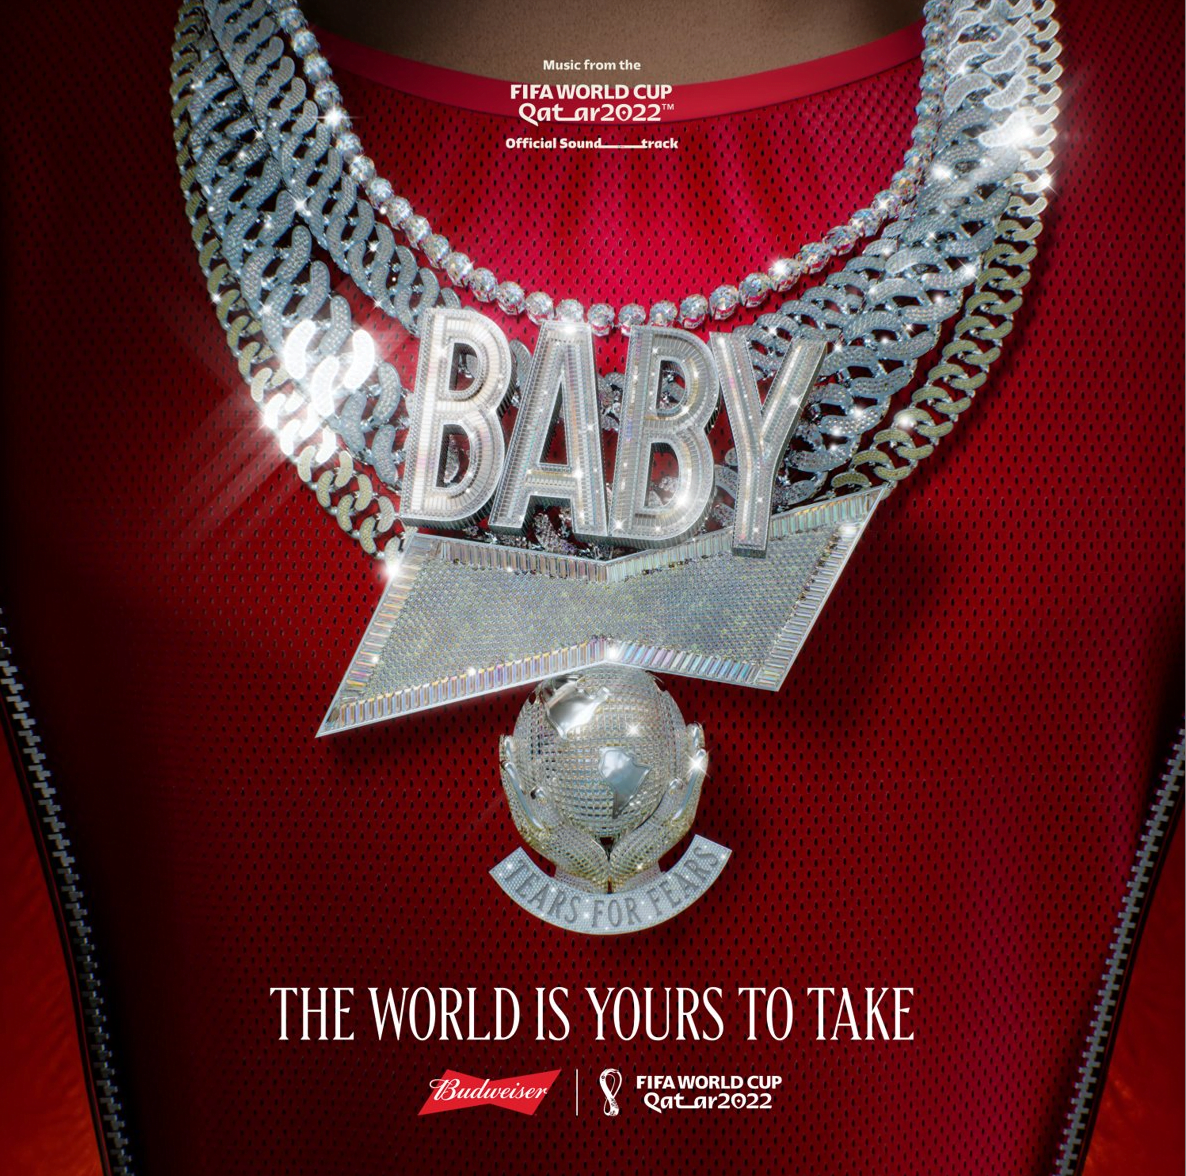 LIL BABY'S "THE WORLD IS YOURS TO TAKE" VIA 360 MAGAZINE